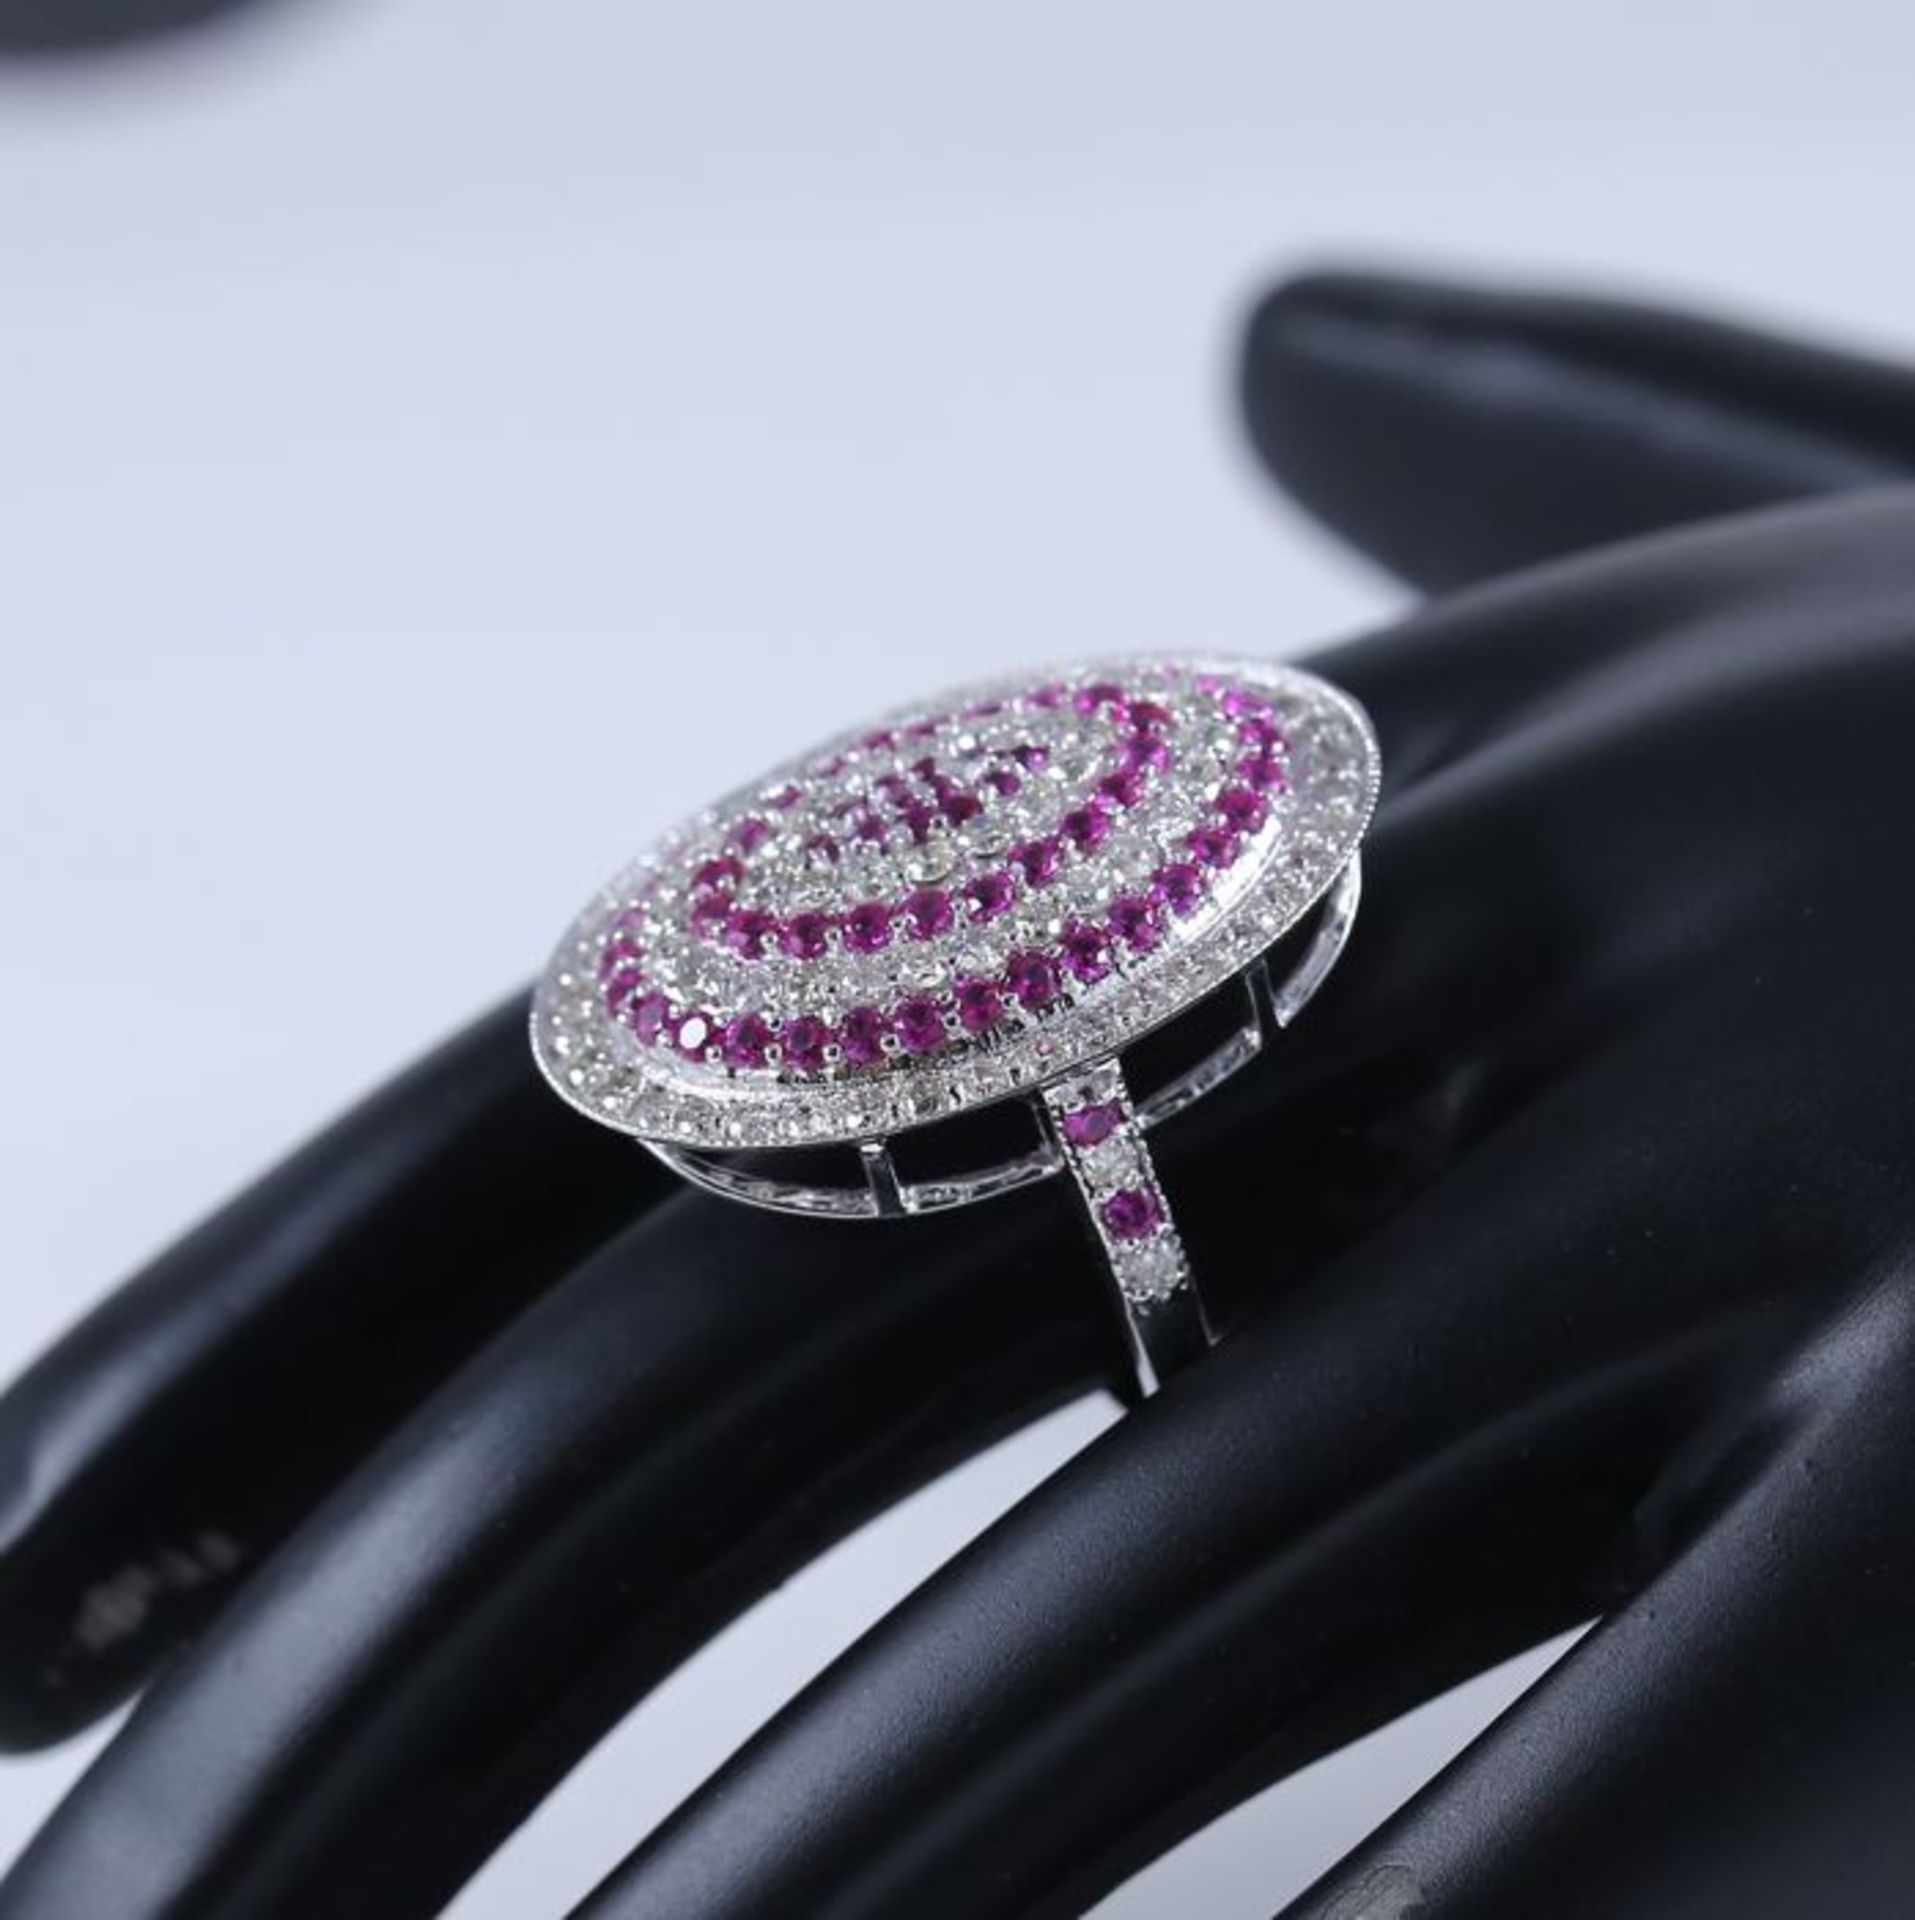 14 K / 585 Very Exclusive White Gold Diamond and Ruby Ring - Image 6 of 10